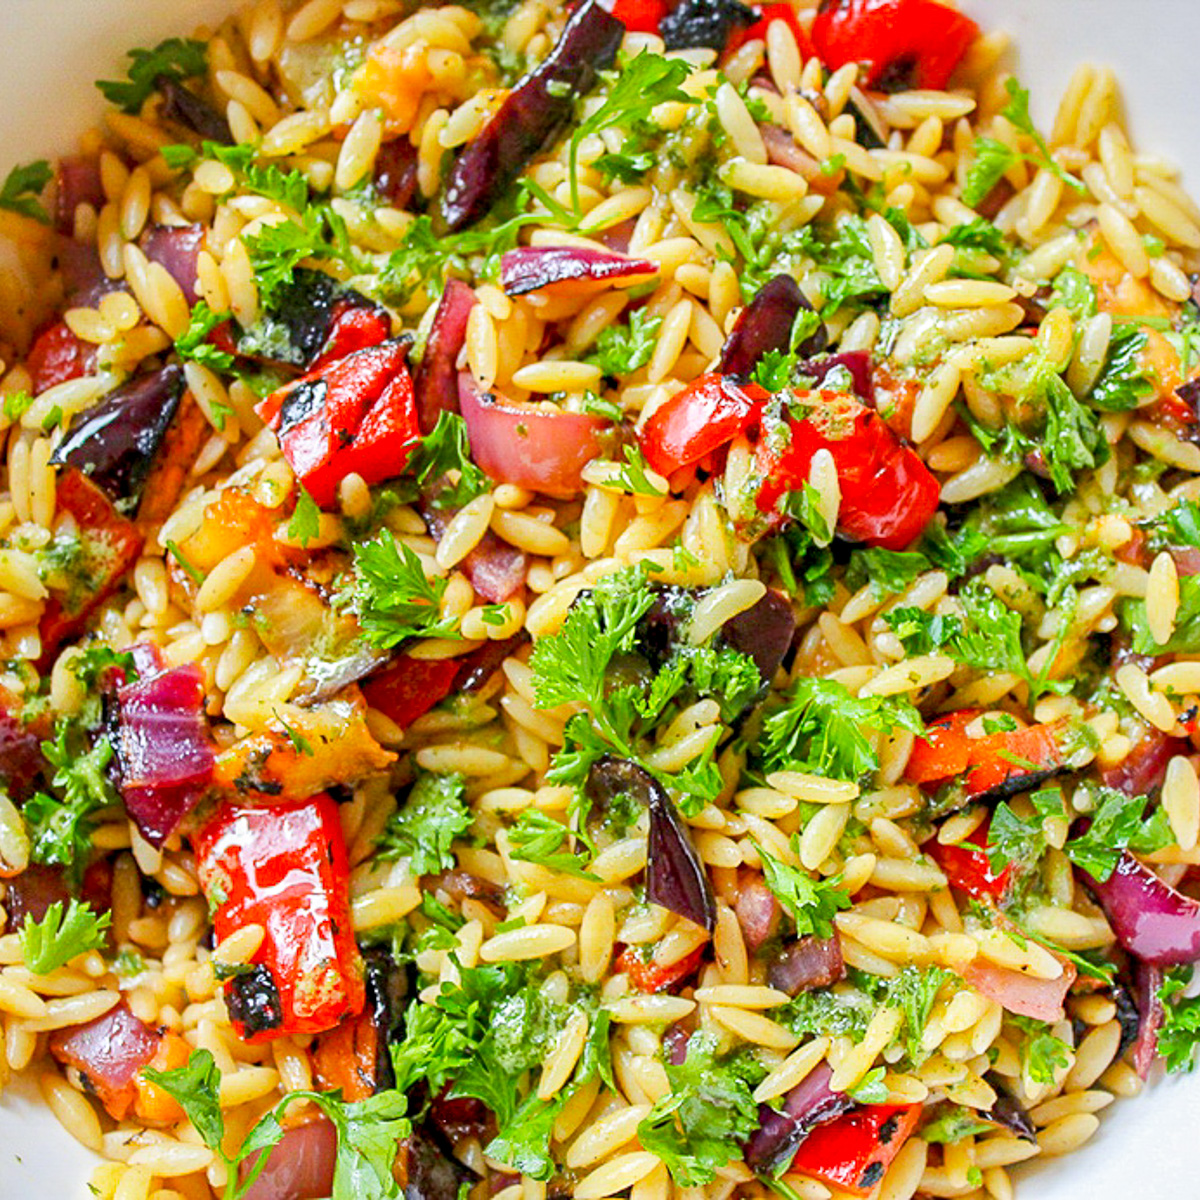 Orzo Pasta Salad Recipe (with grilled vegetables)